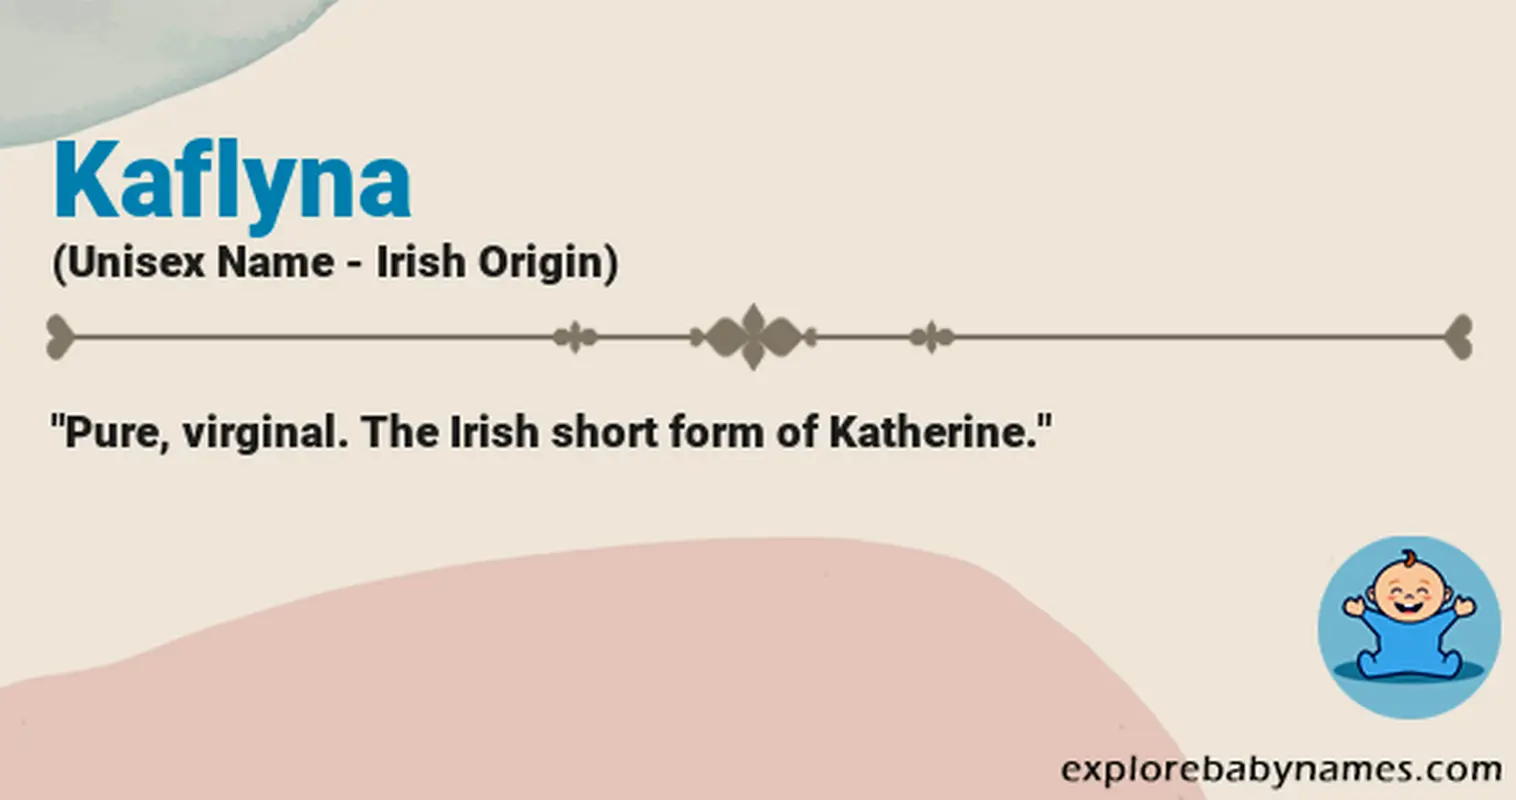 Meaning of Kaflyna